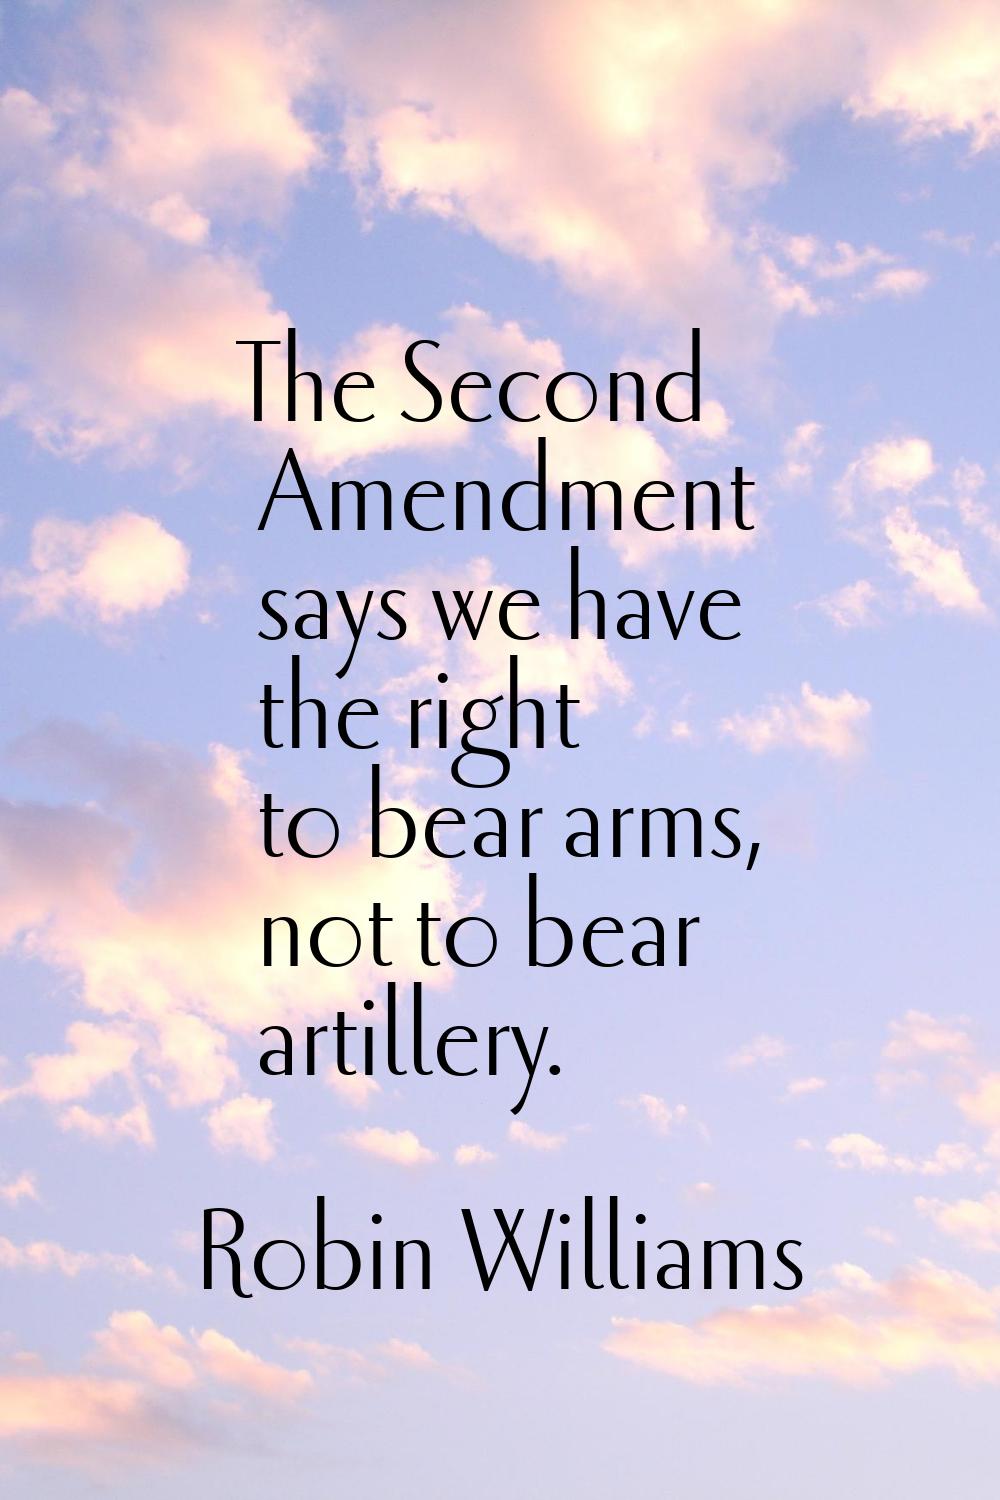 The Second Amendment says we have the right to bear arms, not to bear artillery.